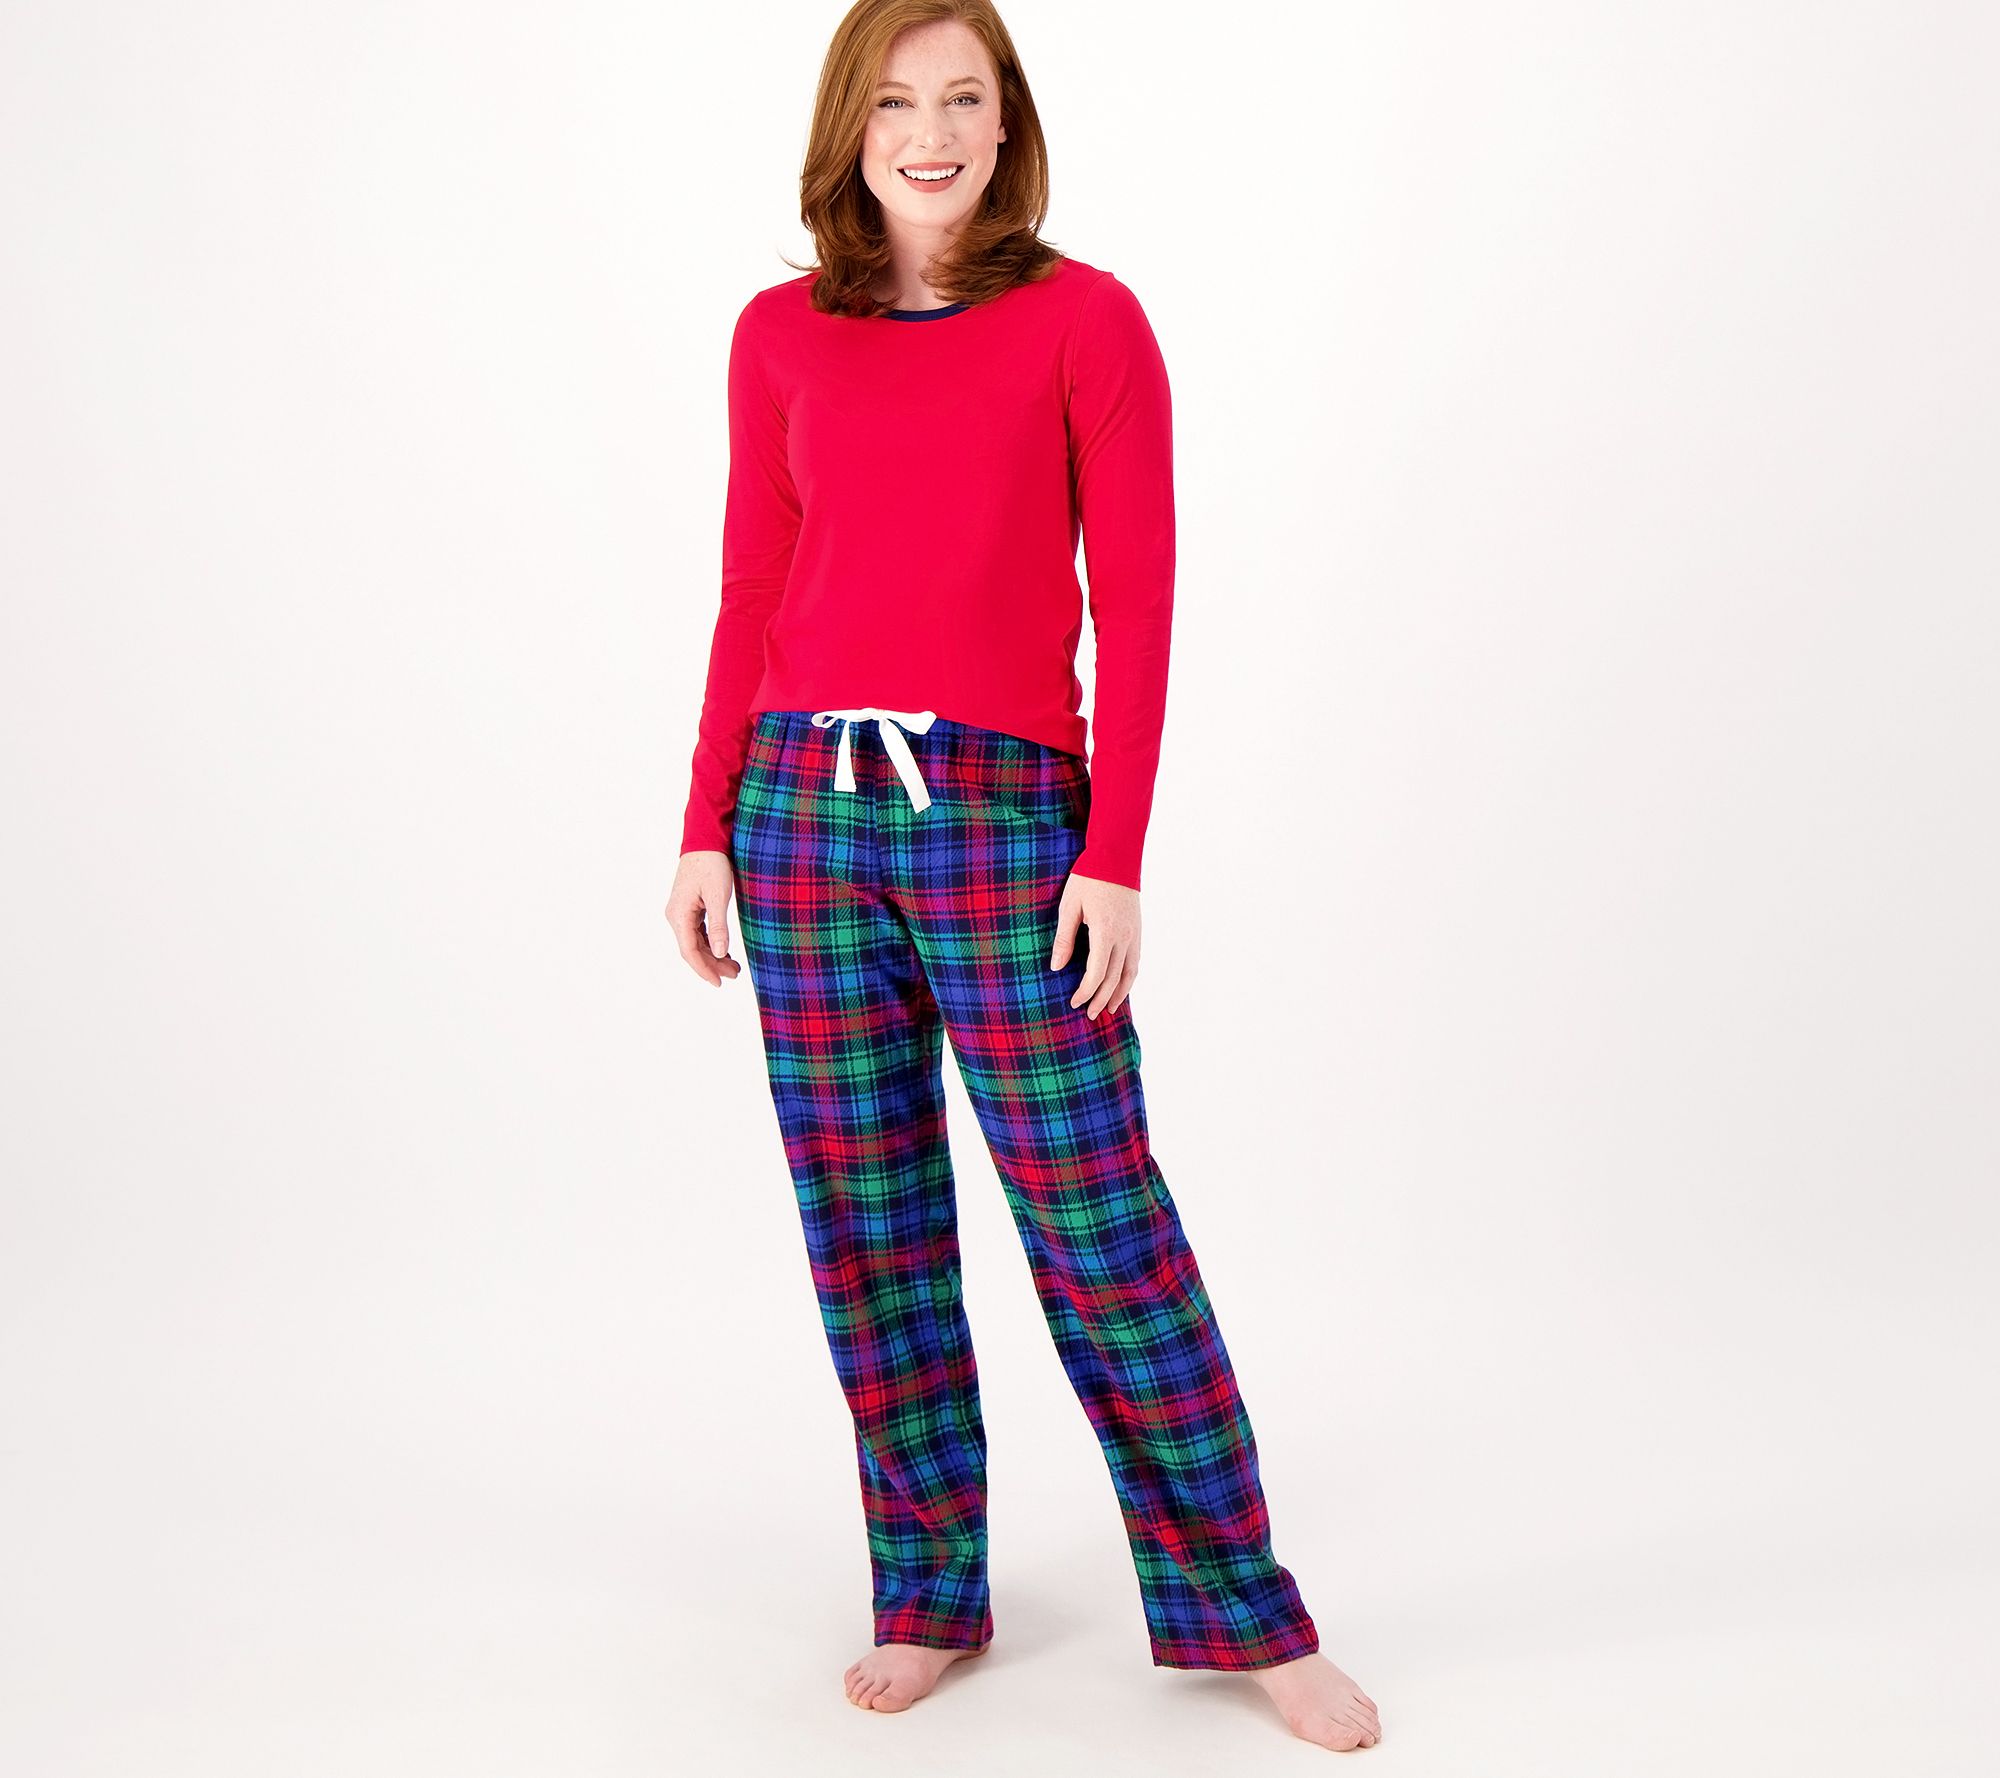 Lands' End Women's Tall Print Flannel Pajama Pants 